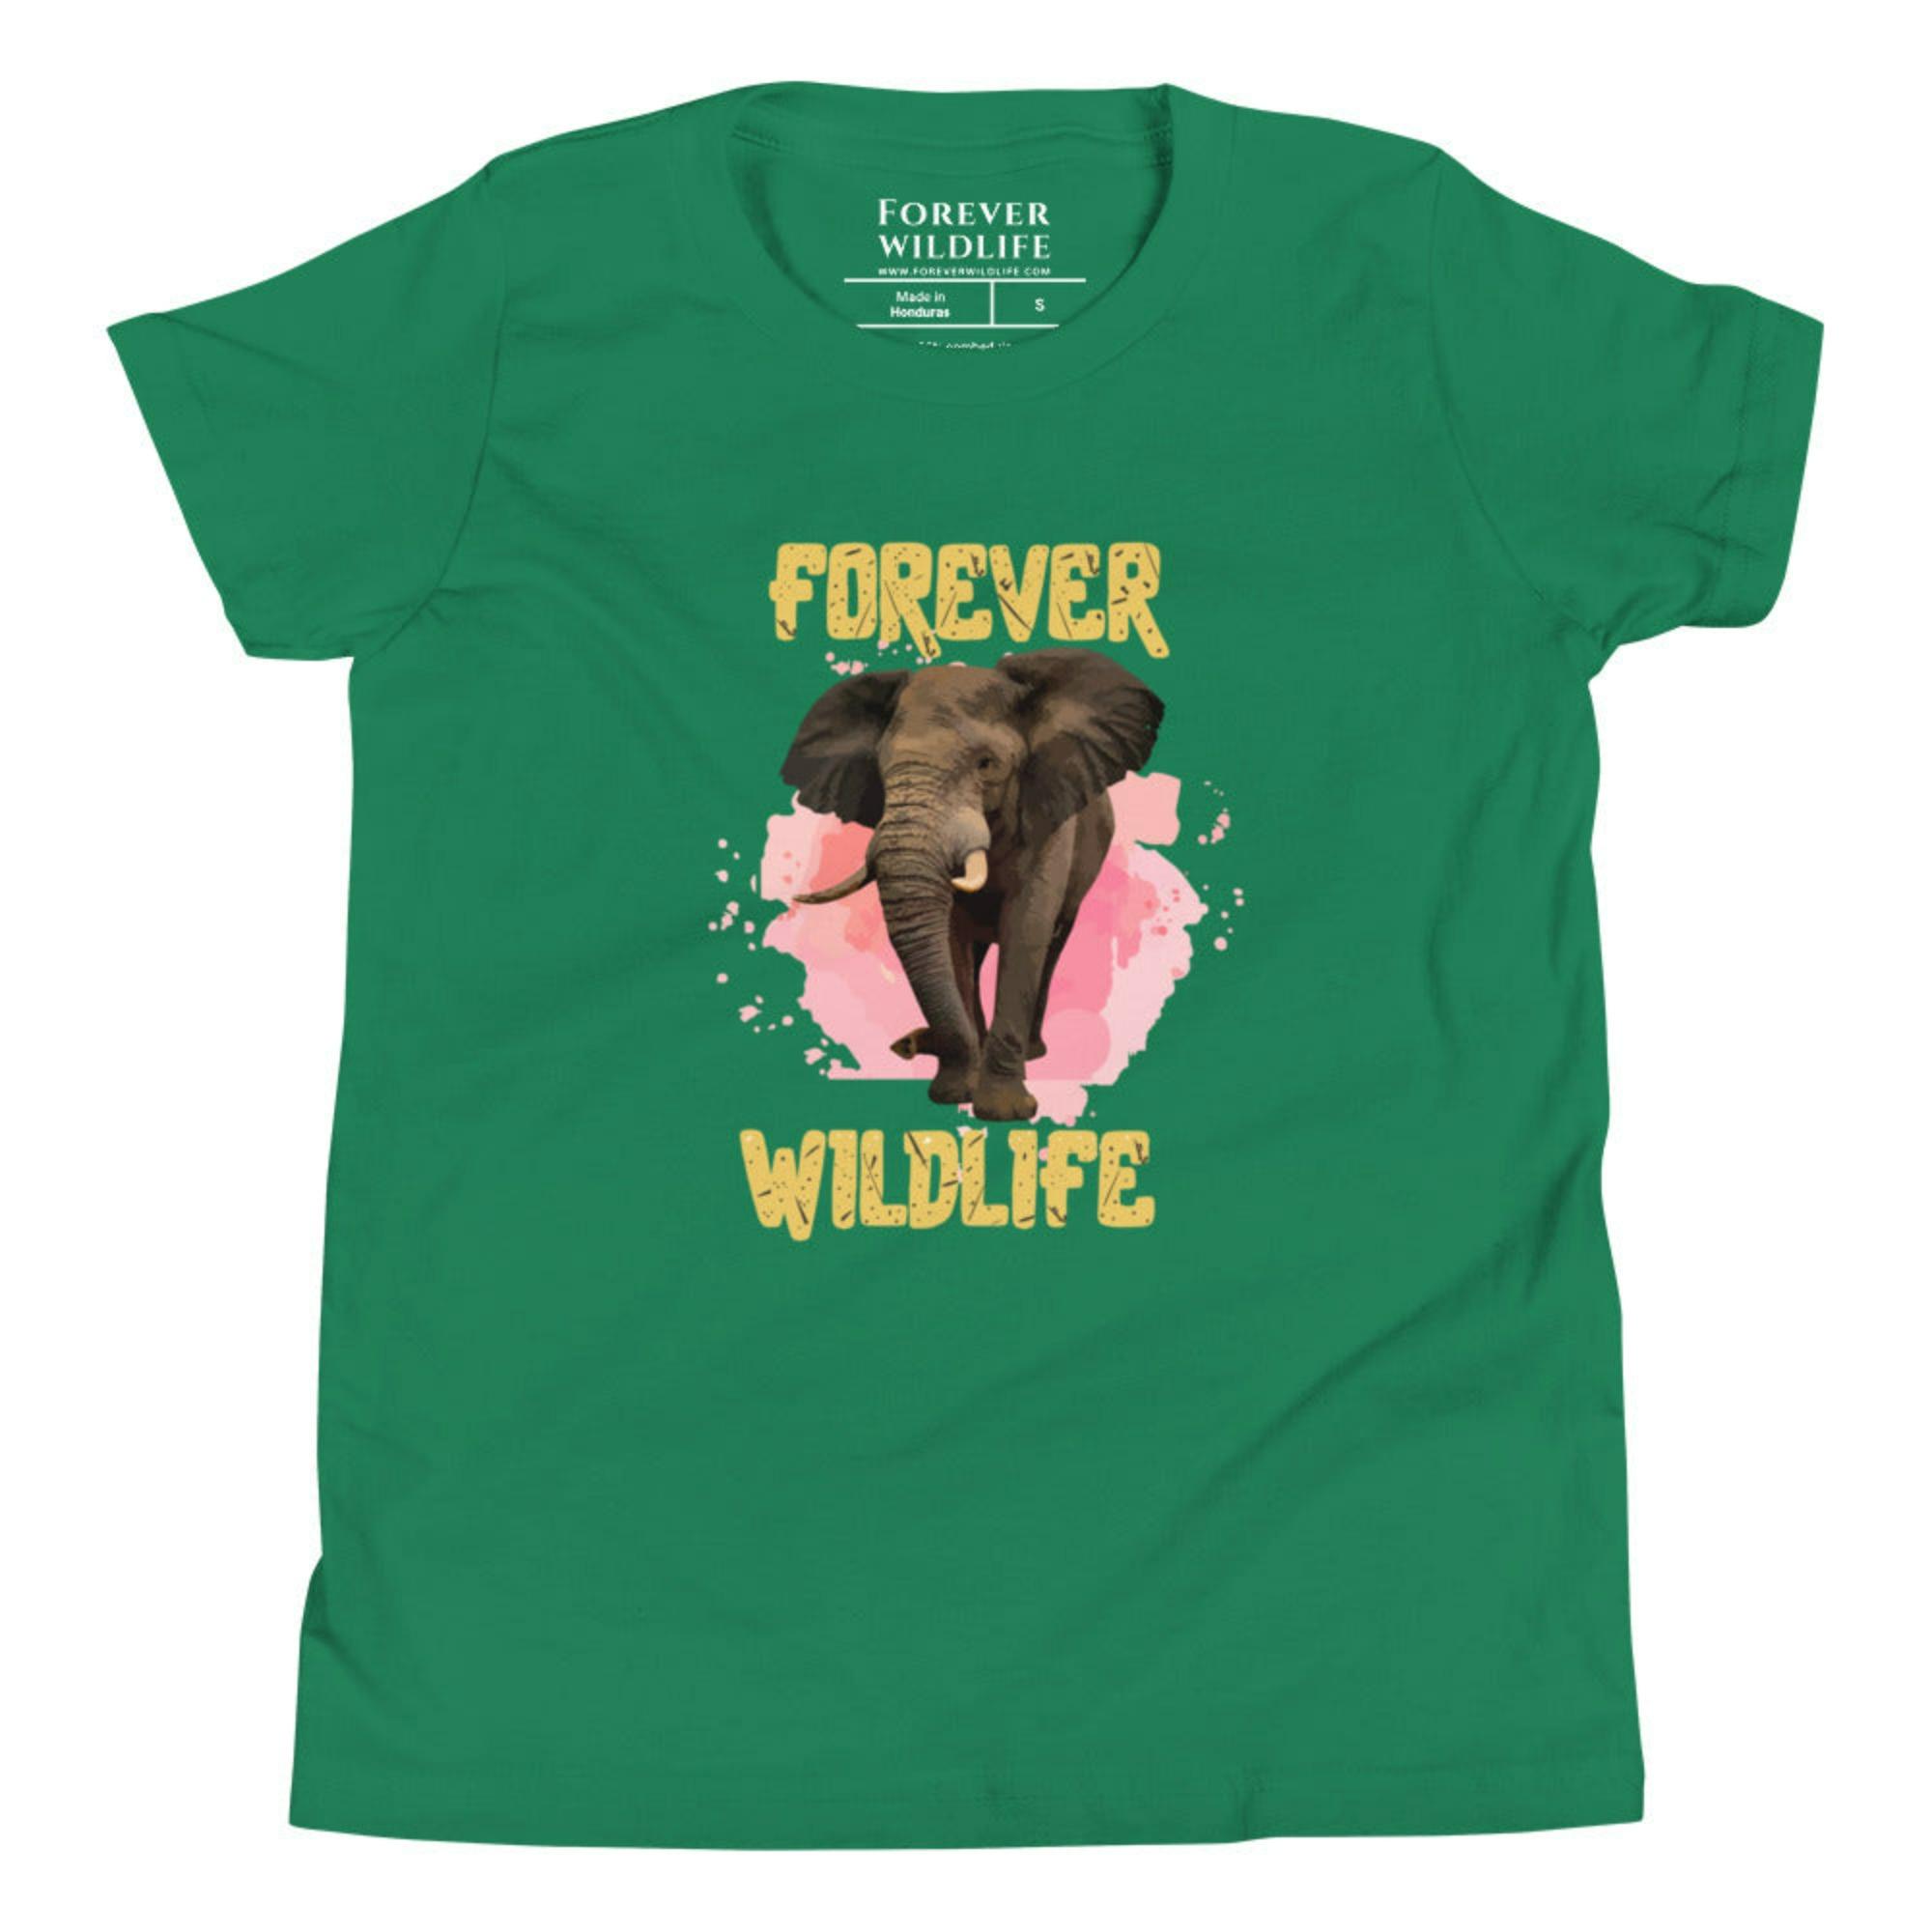 Kelly Youth T-Shirt with Elephant graphic as part of Wildlife T Shirts, Wildlife Clothing & Apparel by Forever Wildlife